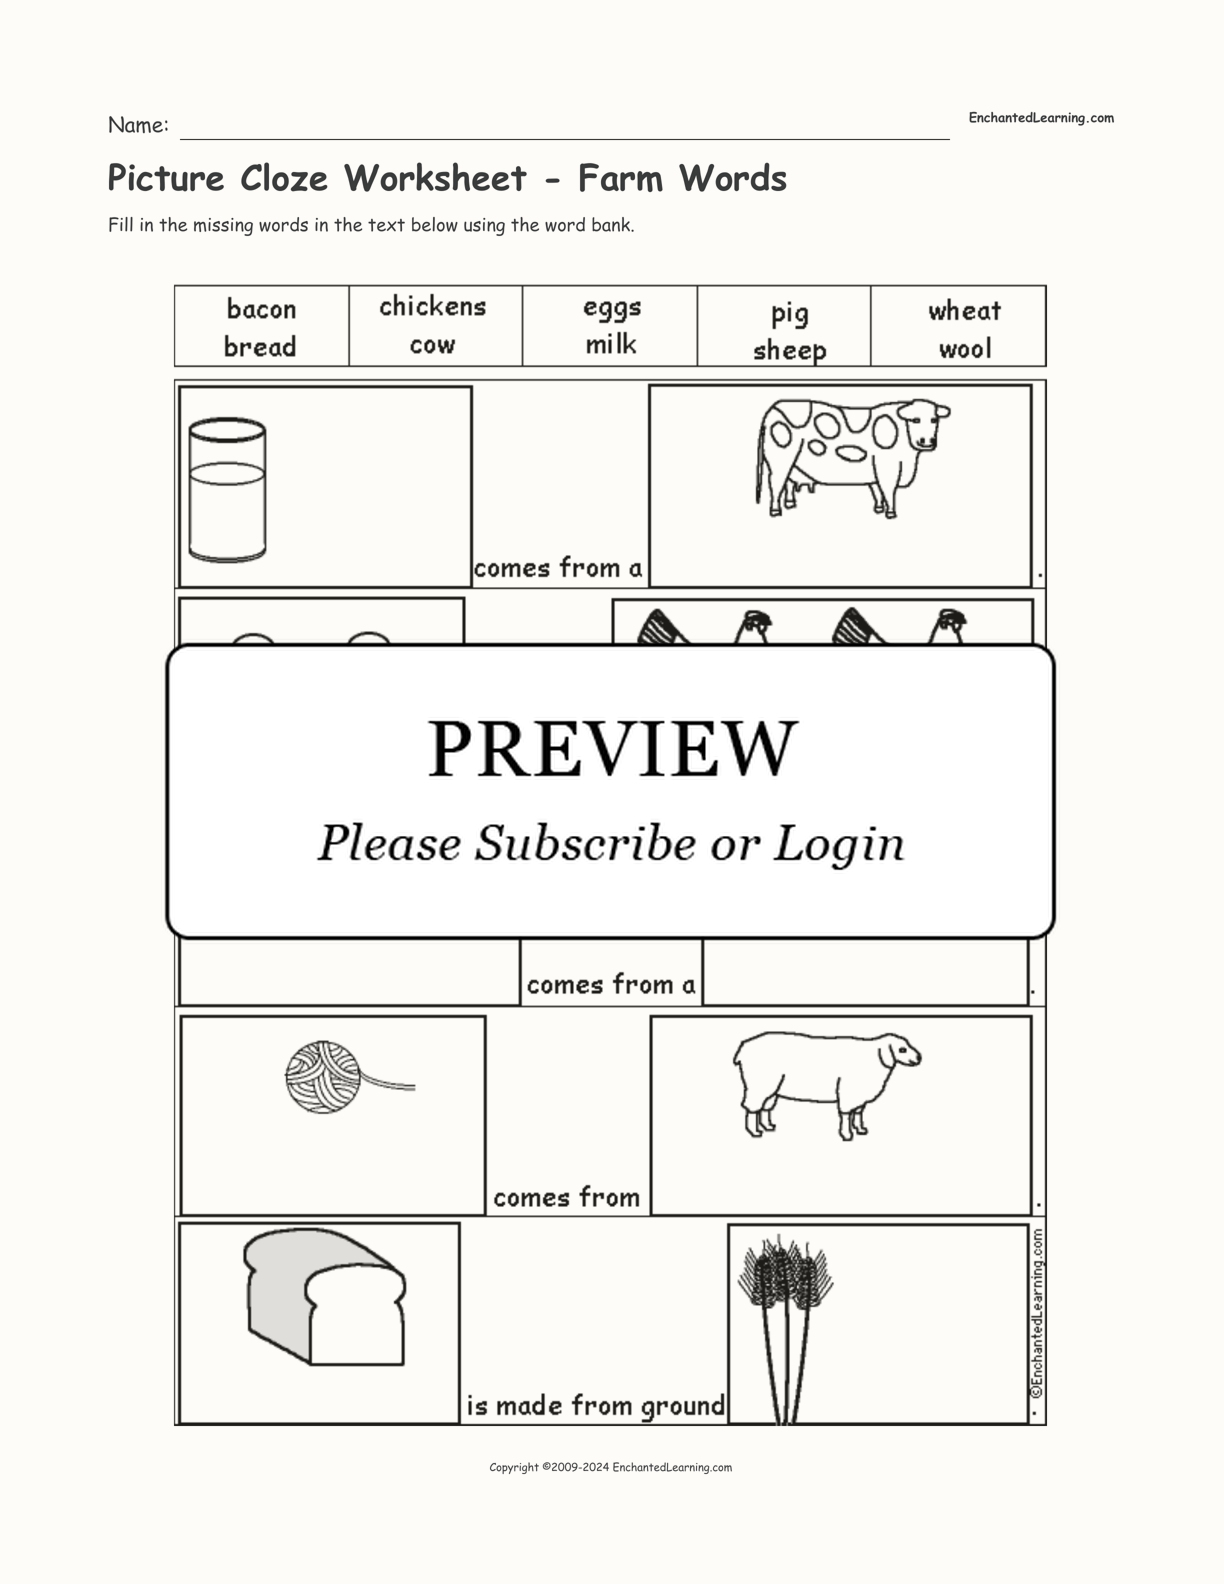 Picture Cloze Worksheet - Farm Words interactive worksheet page 1